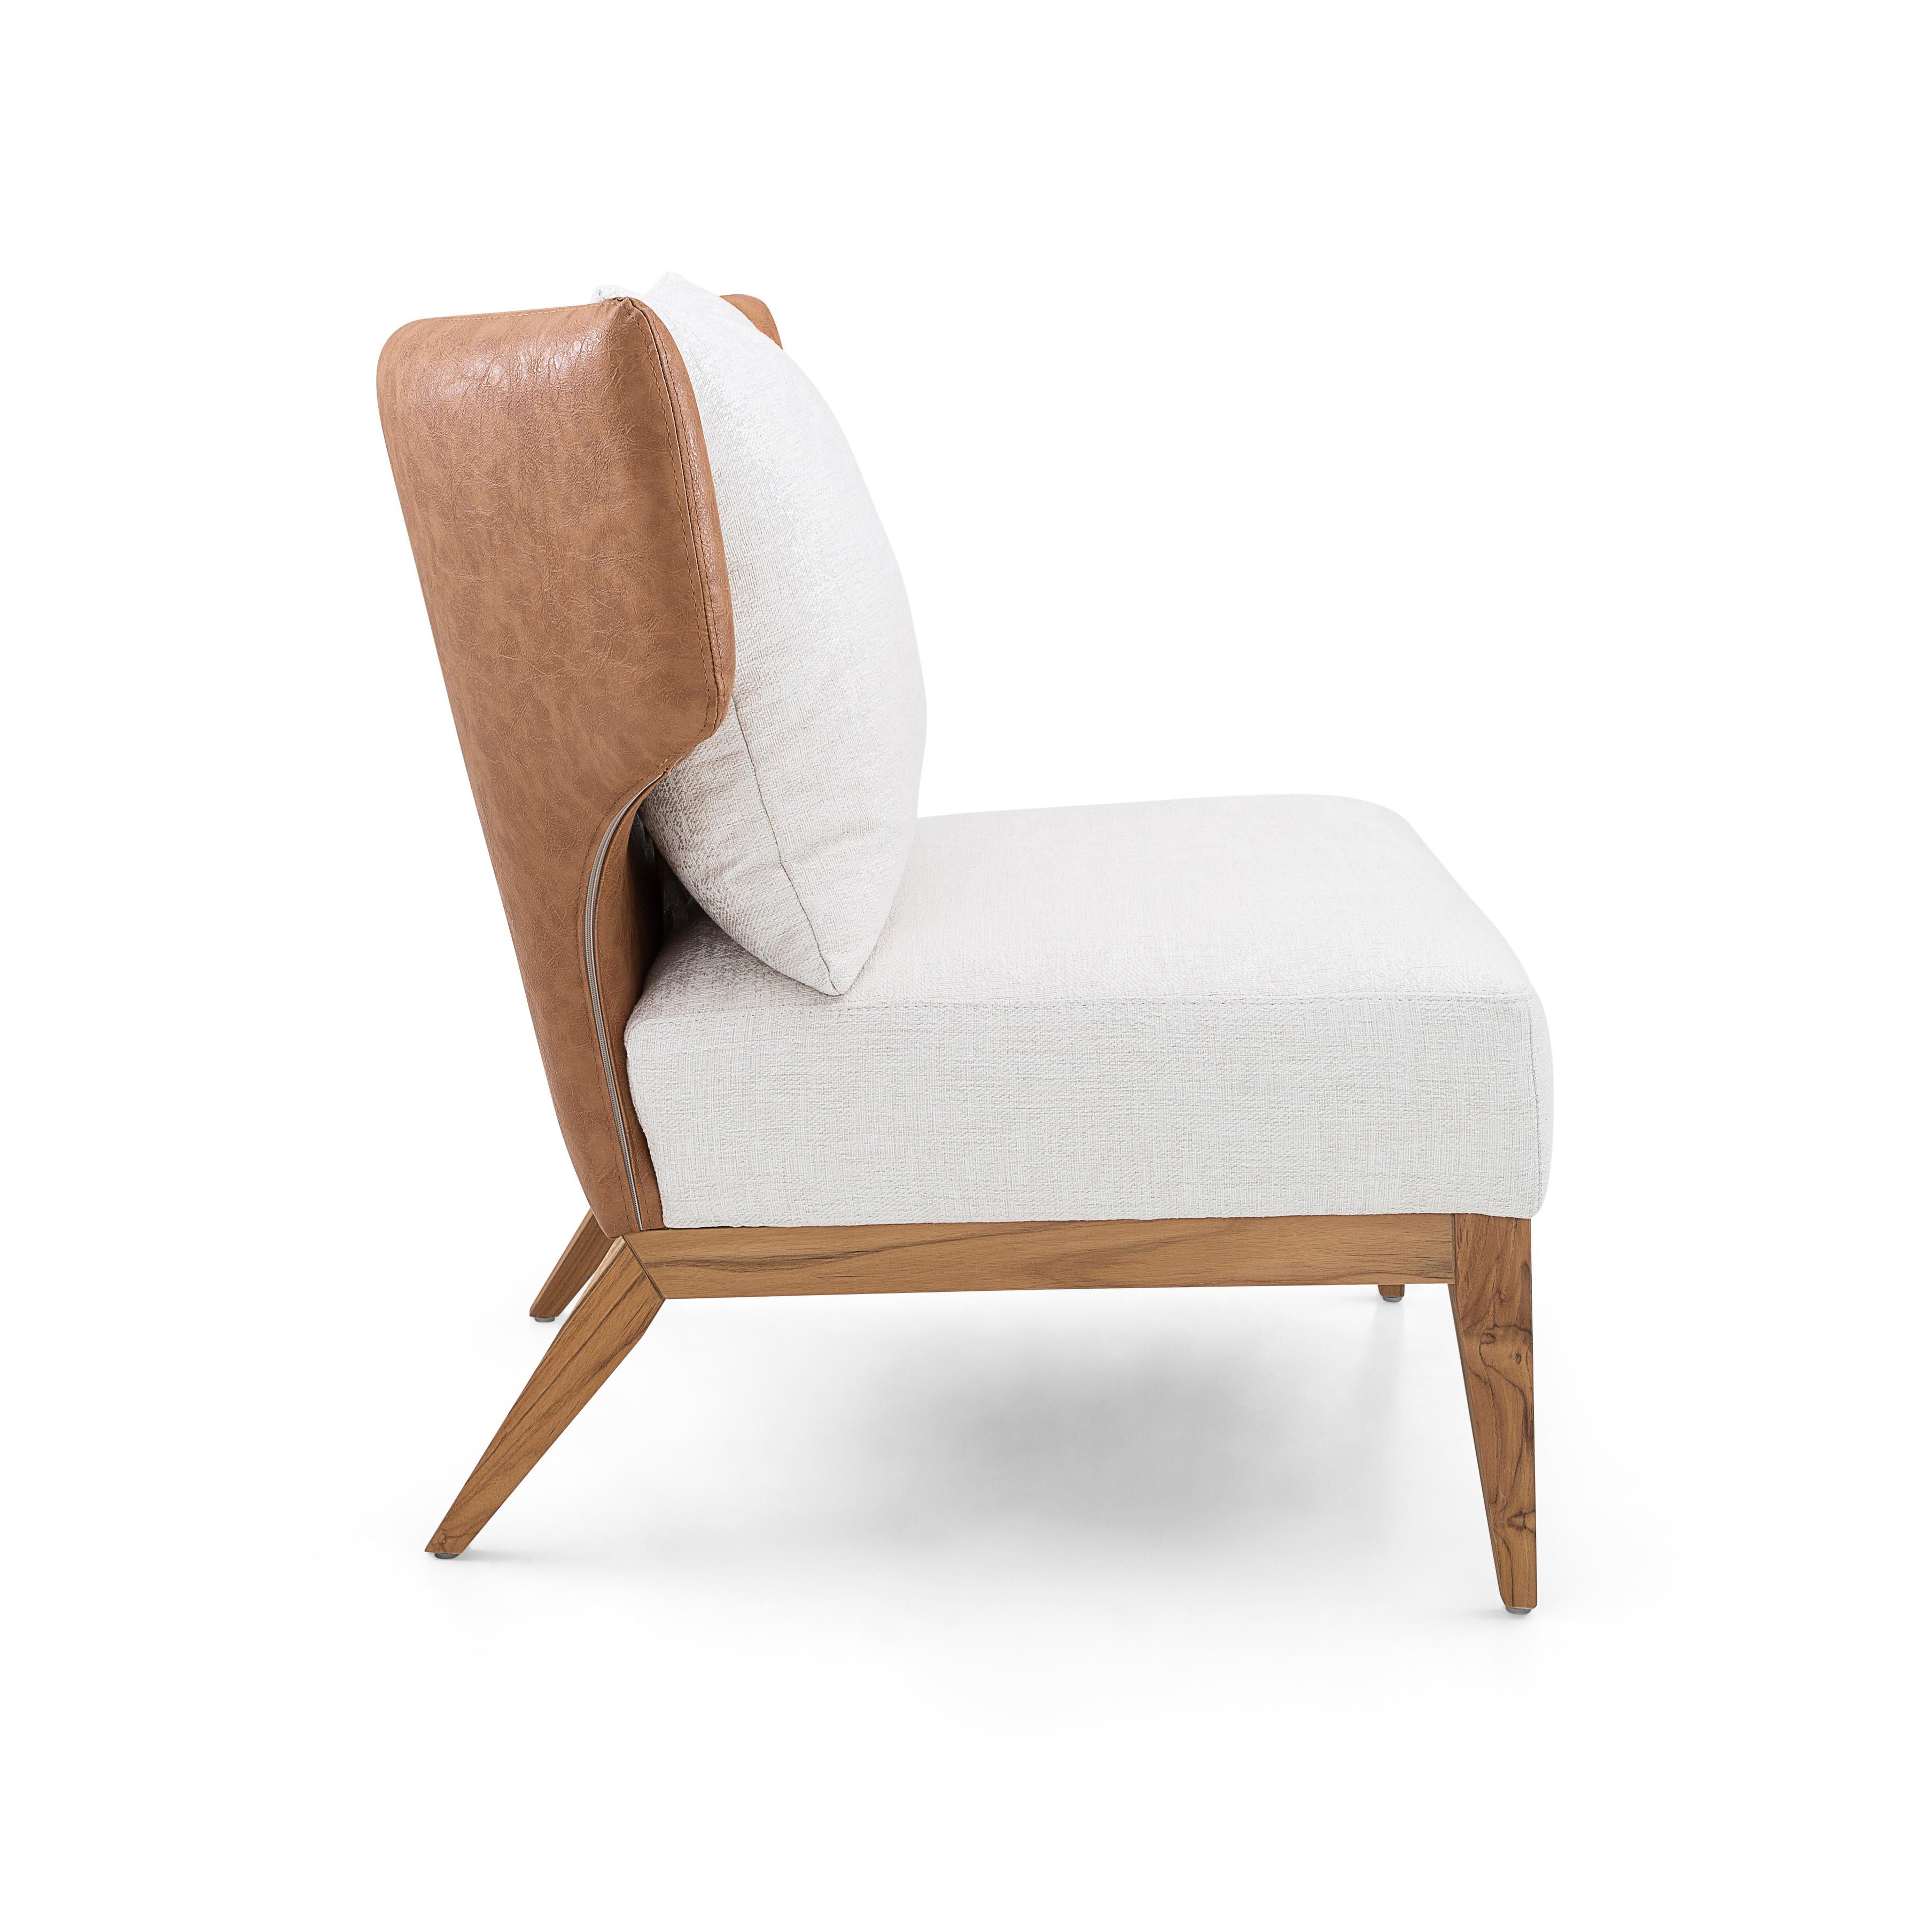 Brazilian Busto Curved Back and Fabric Seat Armchair in Teak